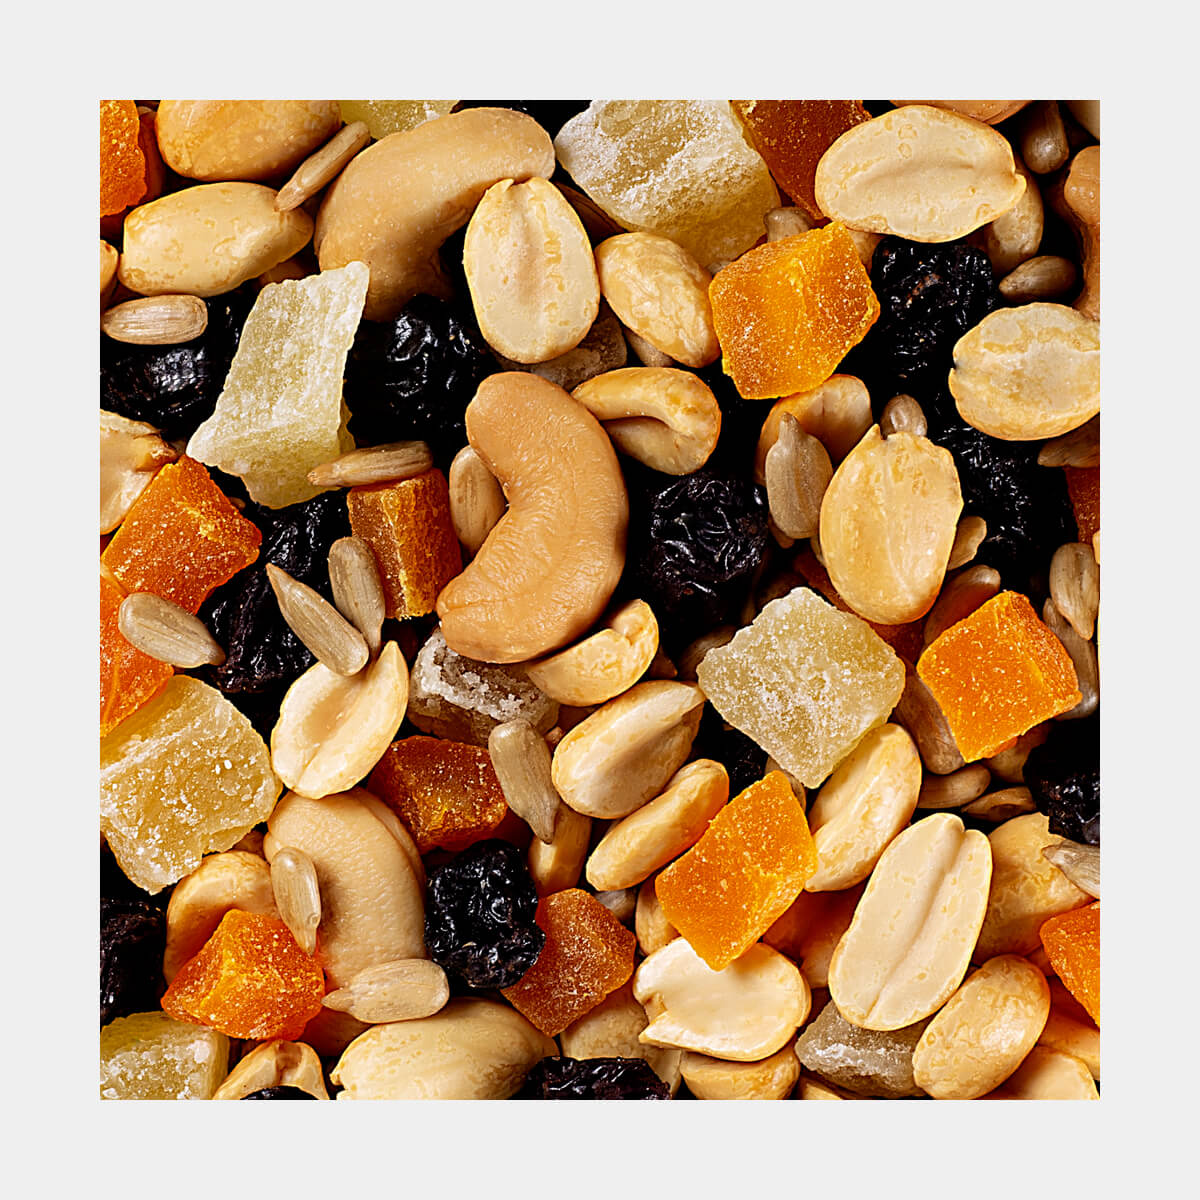 TRAIL MIX VARIETY PACK